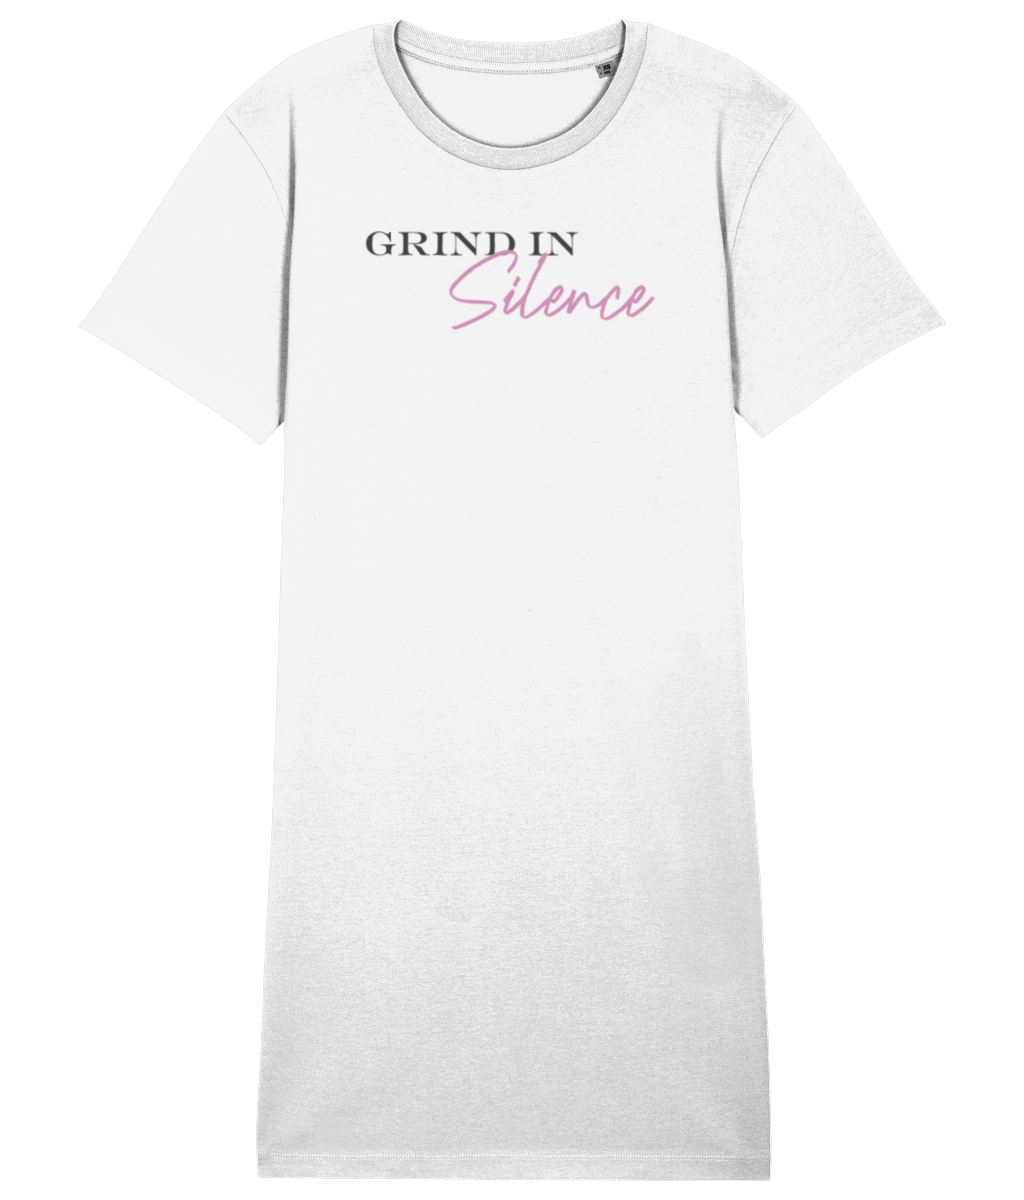 GRIND IN SILENCE T-SHIRT DRESS